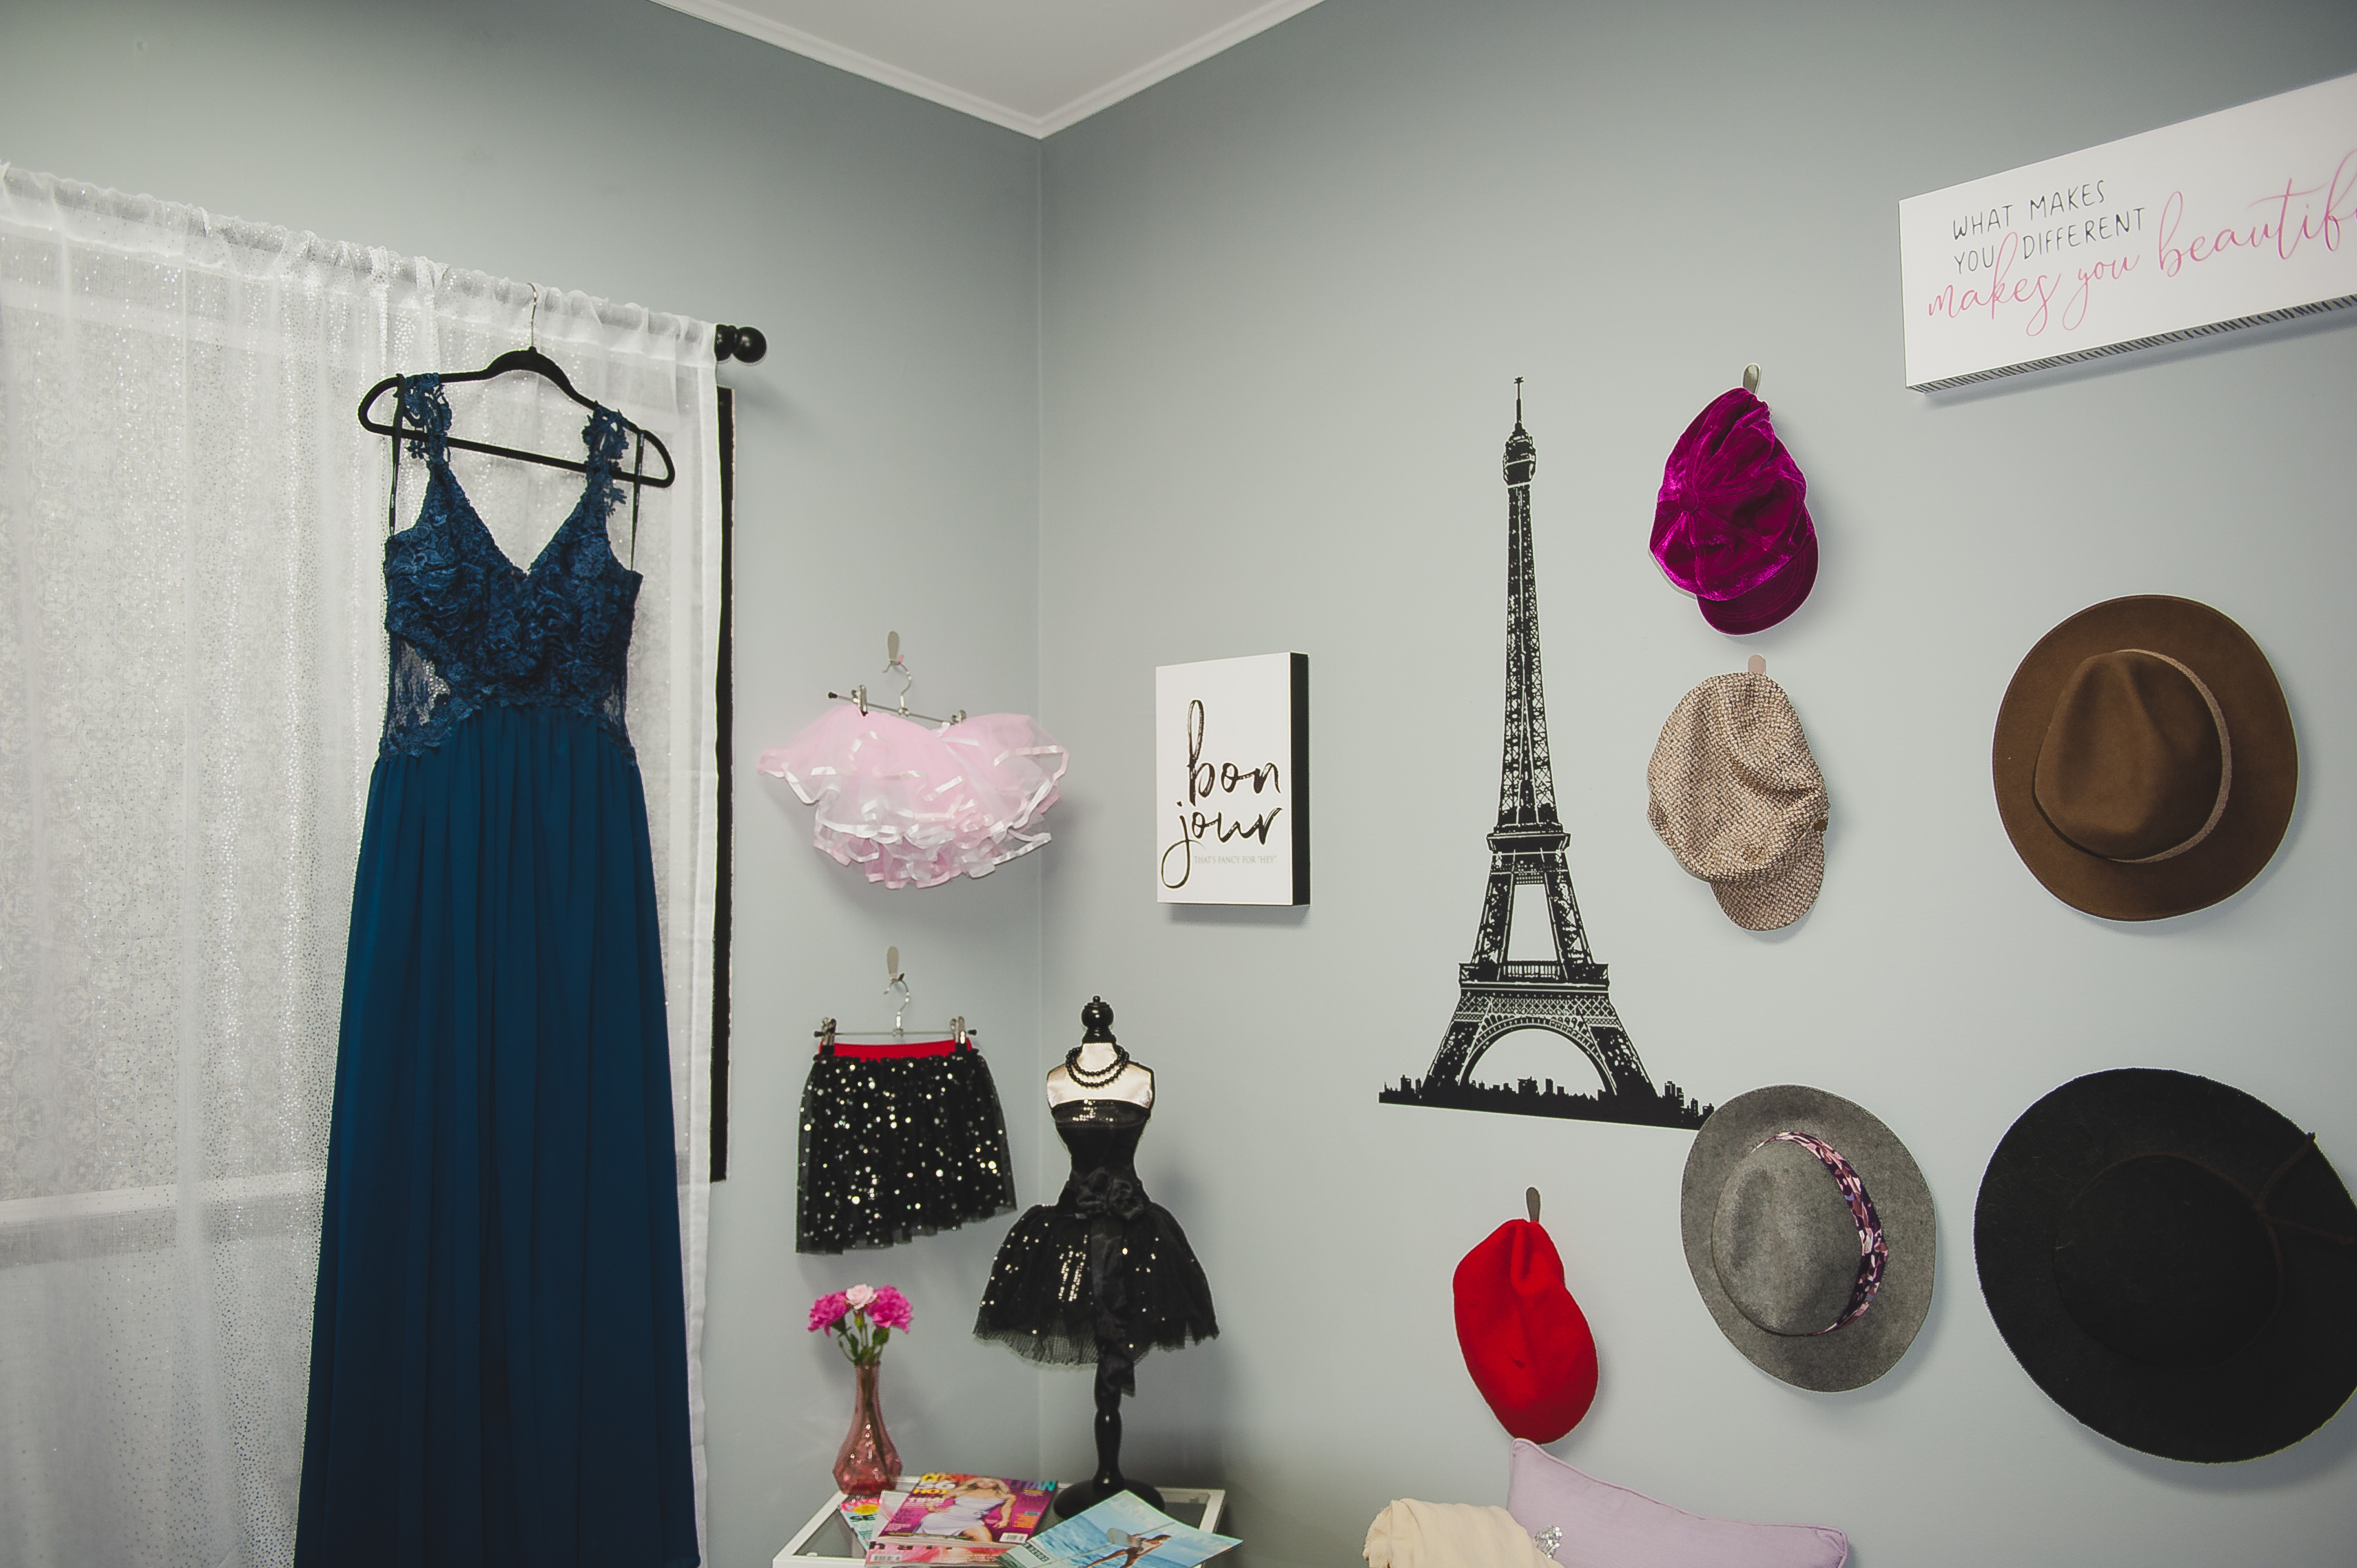 Travel Inspired Wall with Eiffel Tower, Hats and Accessories for Senior Portrait Sessions at Studio 253 in Tacoma